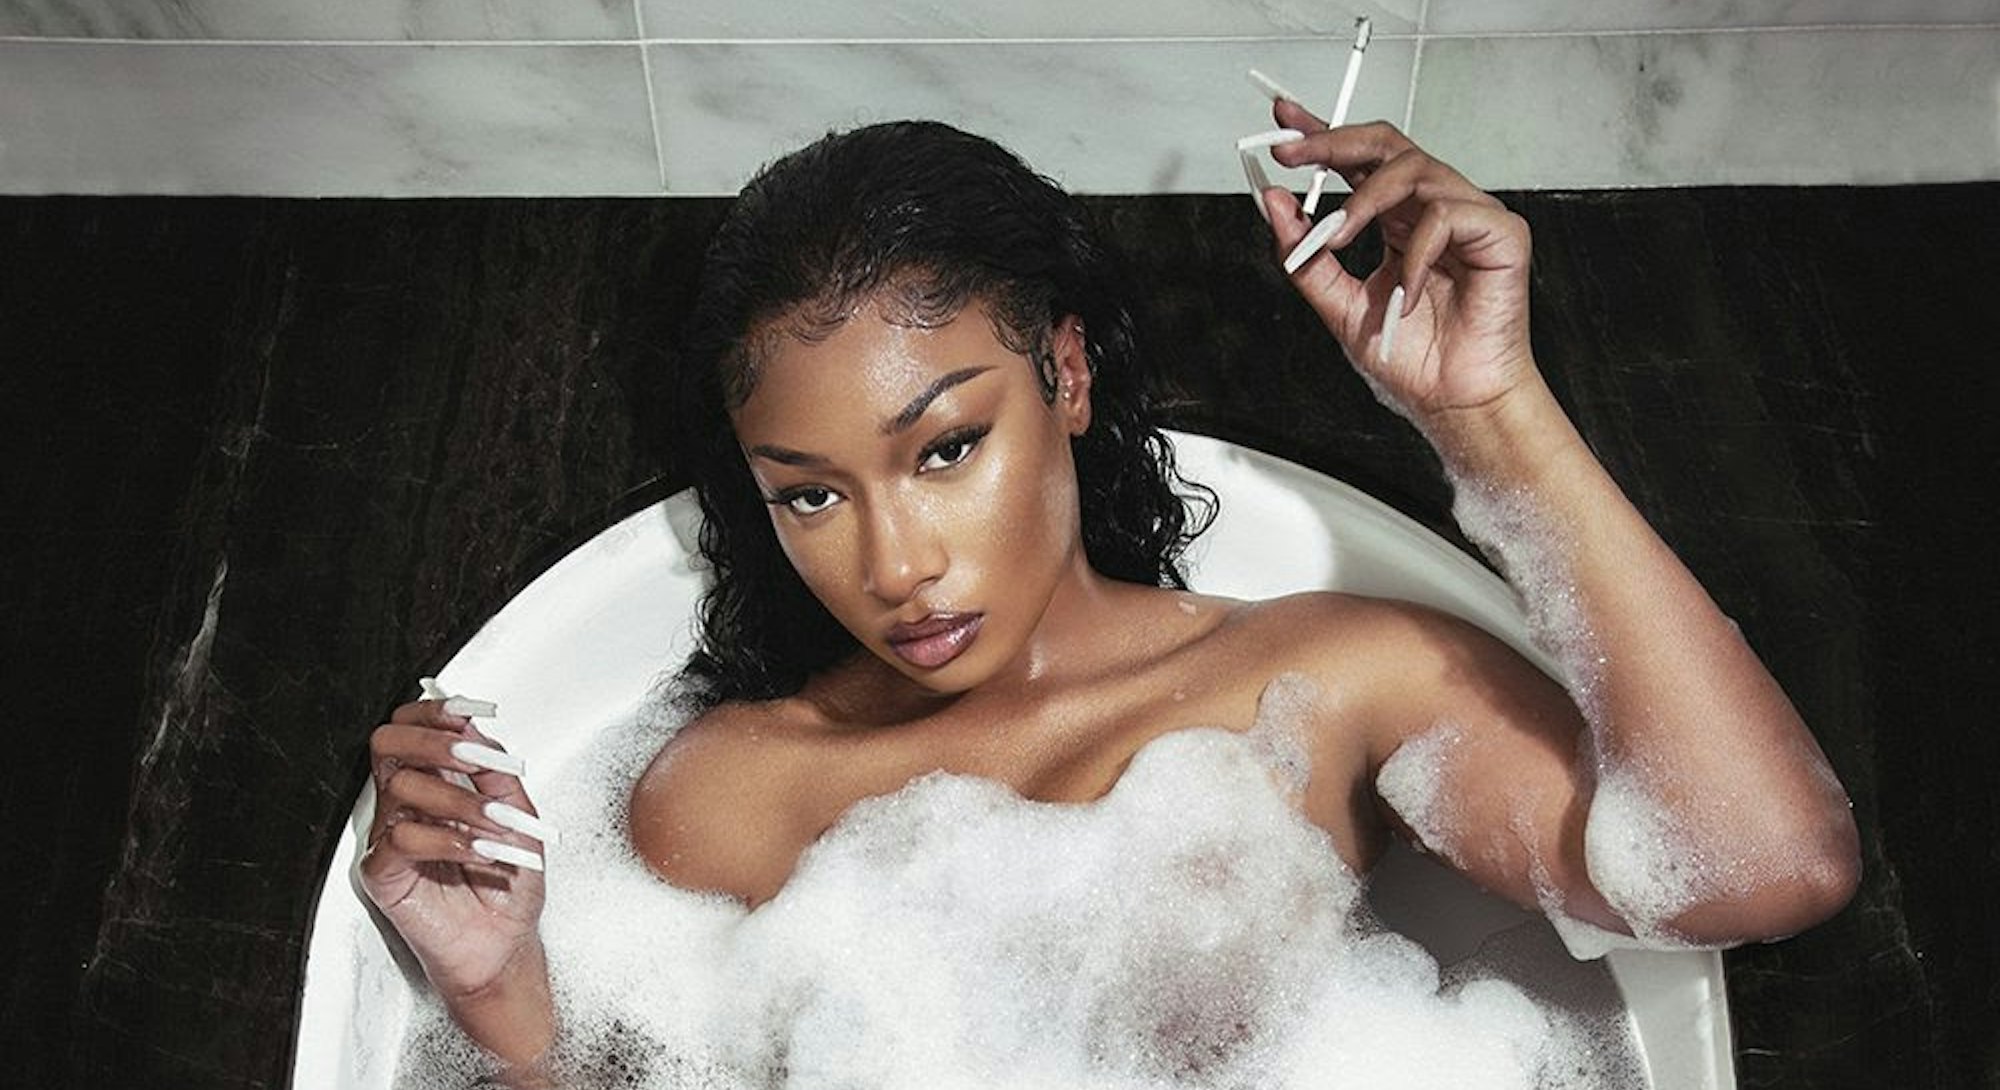 Cover of SOUNDCHECK featuring singer Megan Thee Stallion in a bathtub with a cigarette in her hand